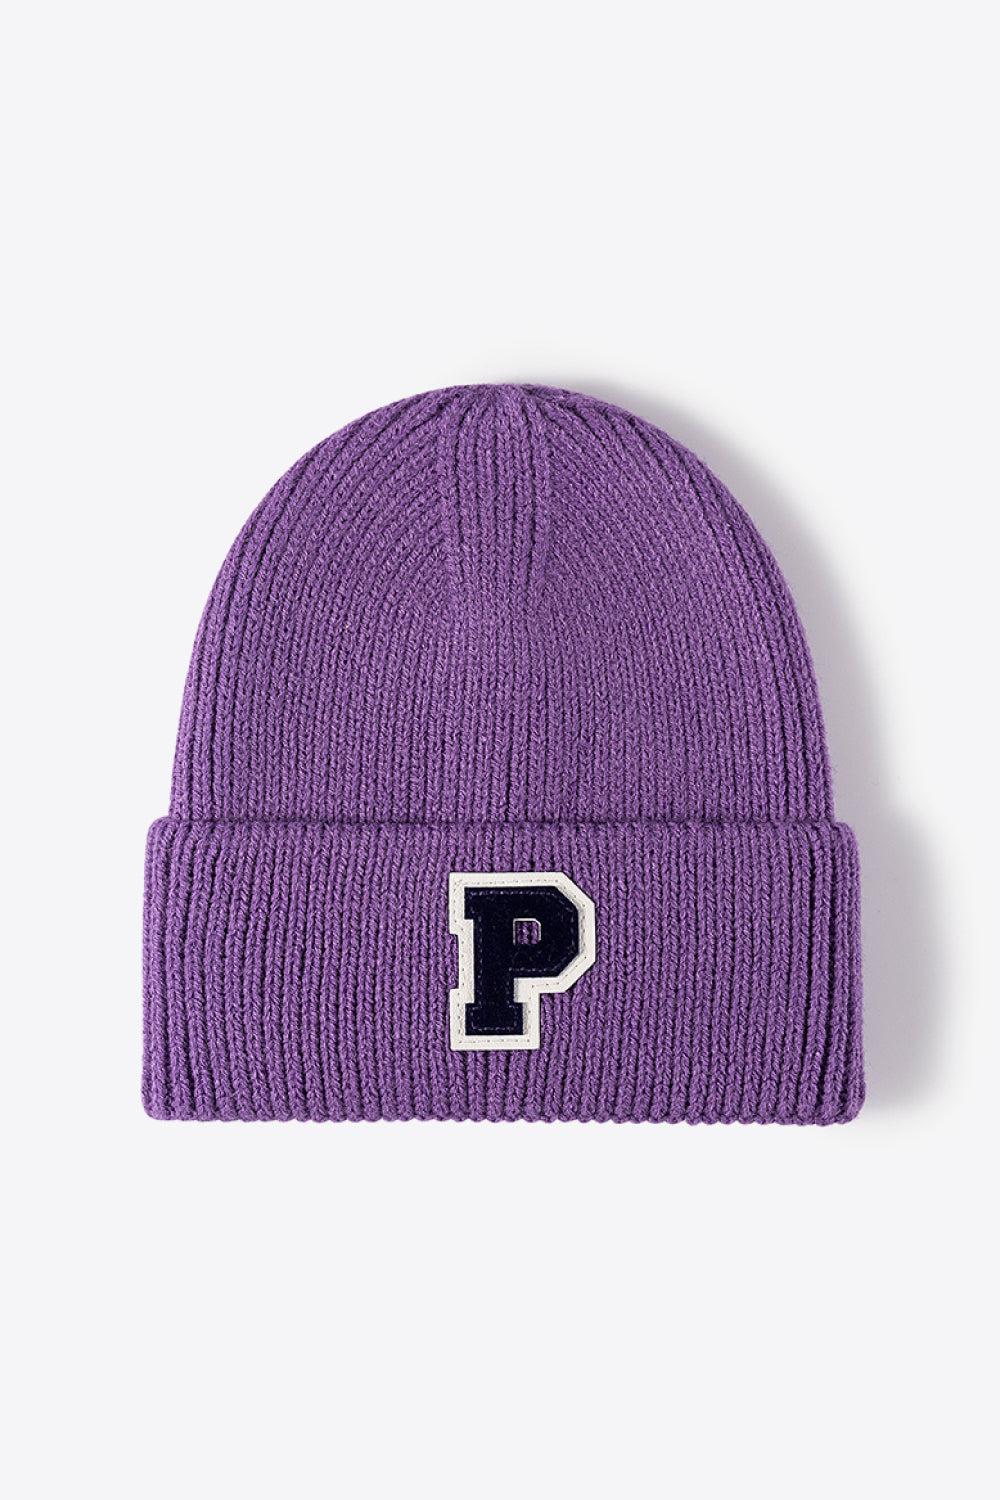 Letter Patch Cuffed Knit Beanie-[Adult]-[Female]-Purple-One Size-2022 Online Blue Zone Planet